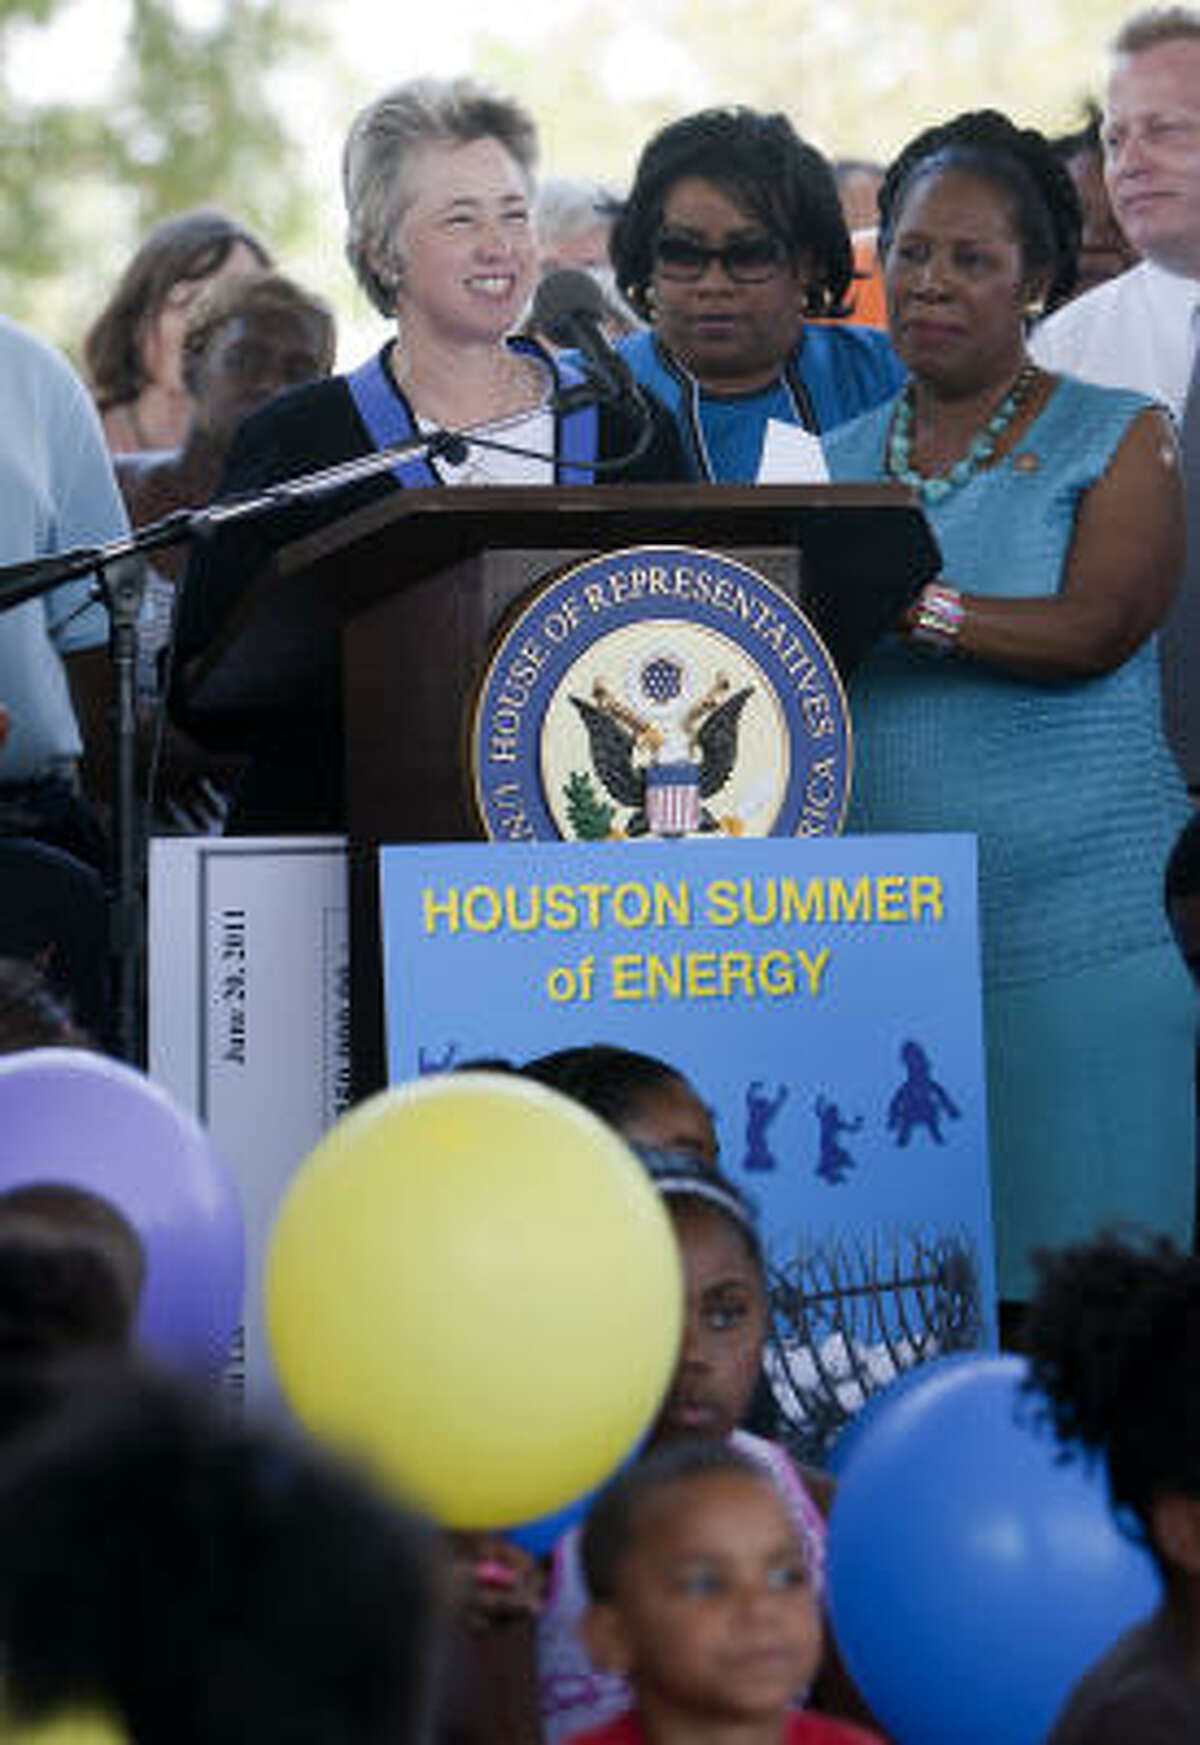 Mayor Annise Parker, left, and U.S. Rep. Sheila Jackson Lee, far right, announced the donation by Marathon Oil and ConocoPhillips on Monday at Independence Heights Park.